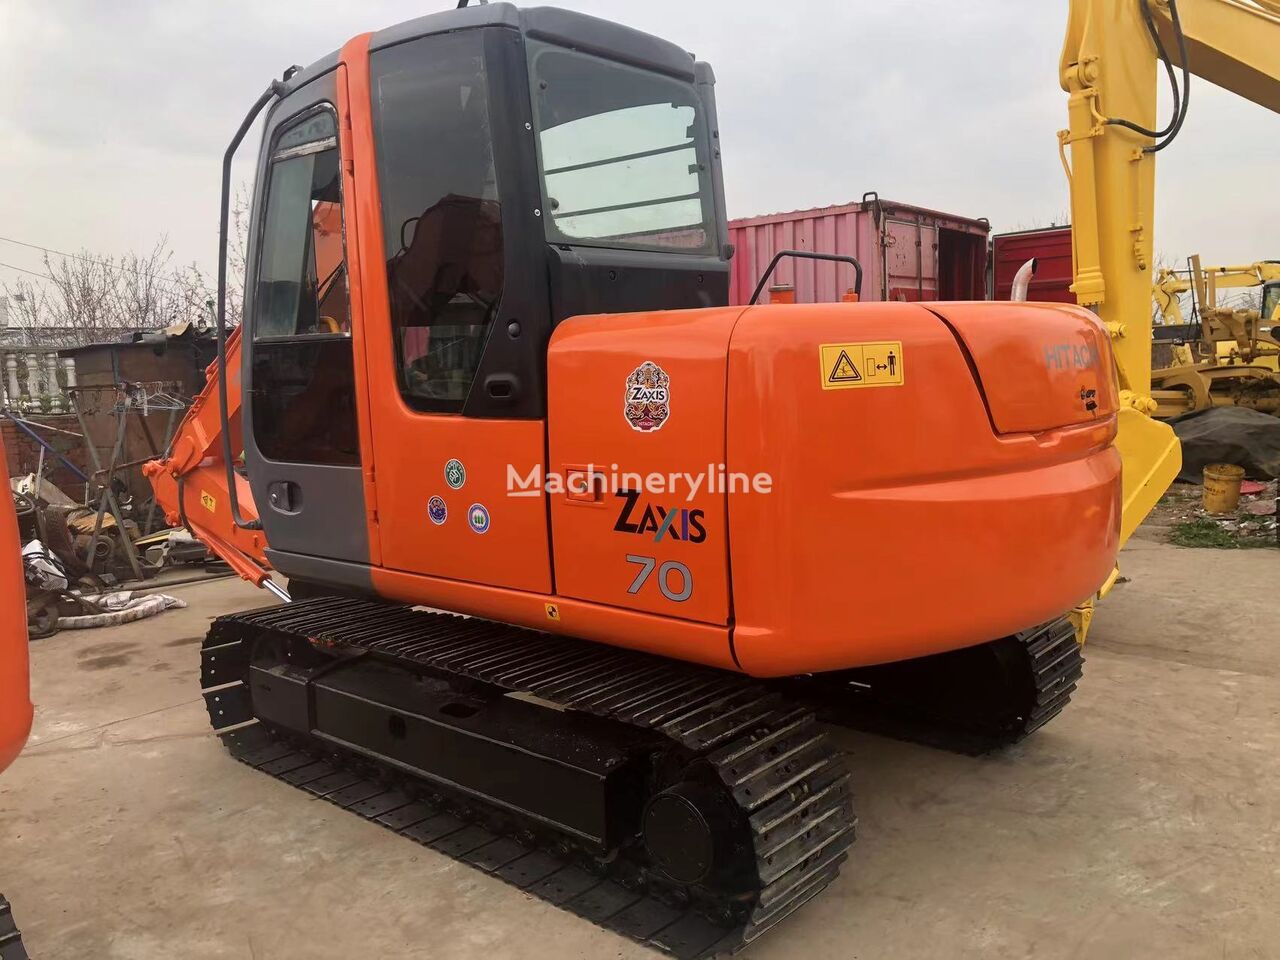 Hitachi ZX70 tracked excavator for sale China, GJ36621